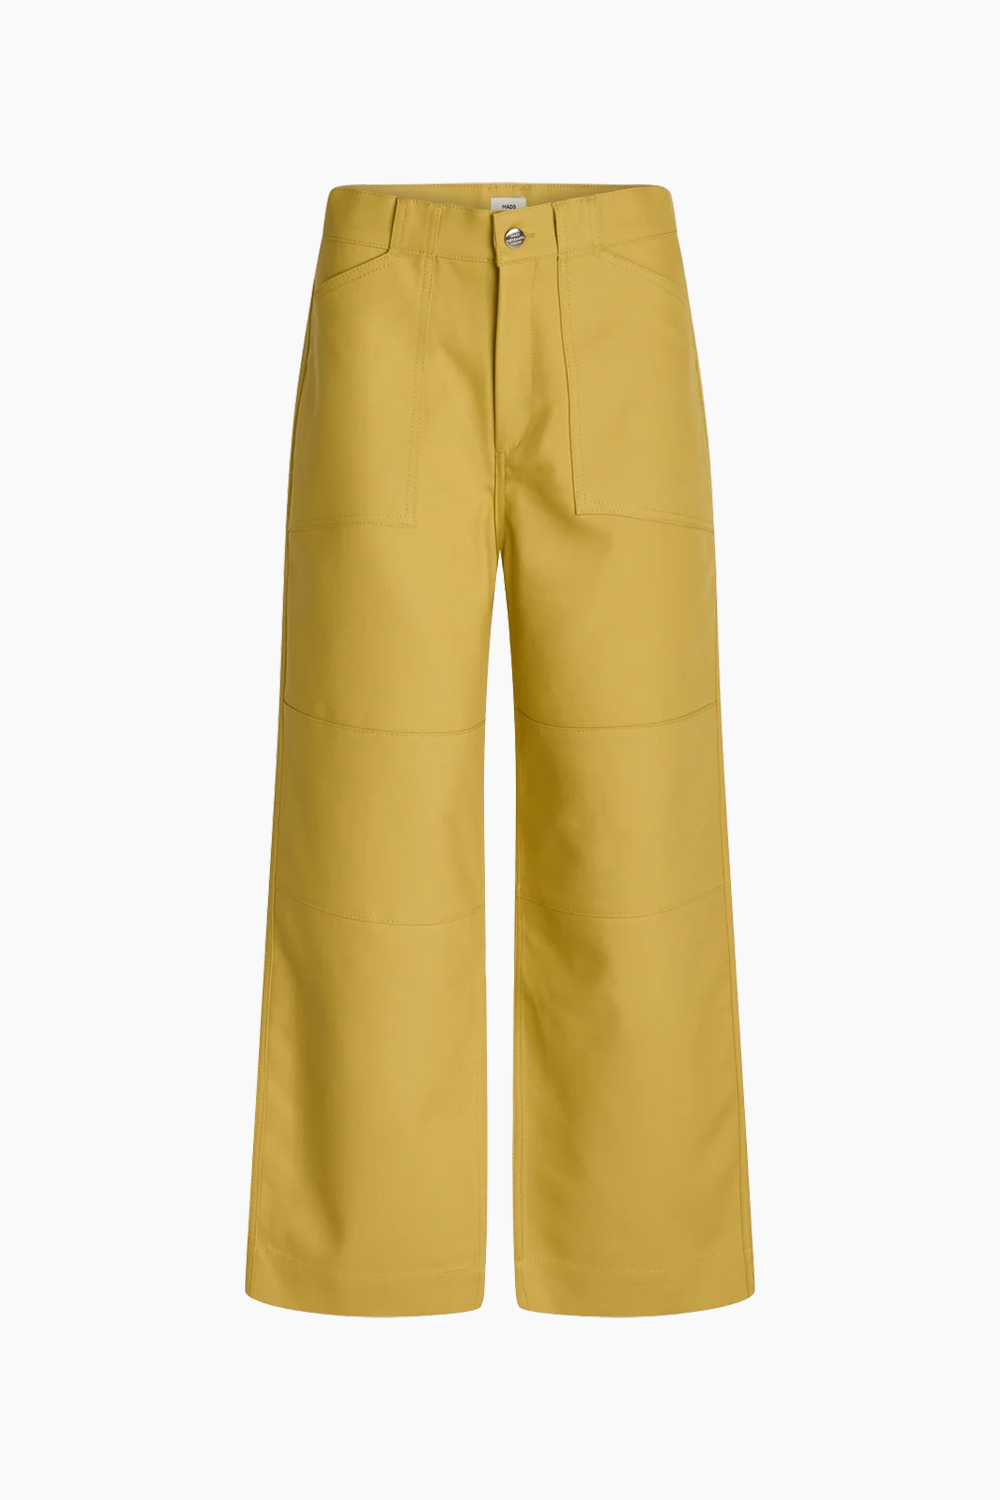 Heavy Twill Krauer Pants - Southern Moss - Mads Nørgaard